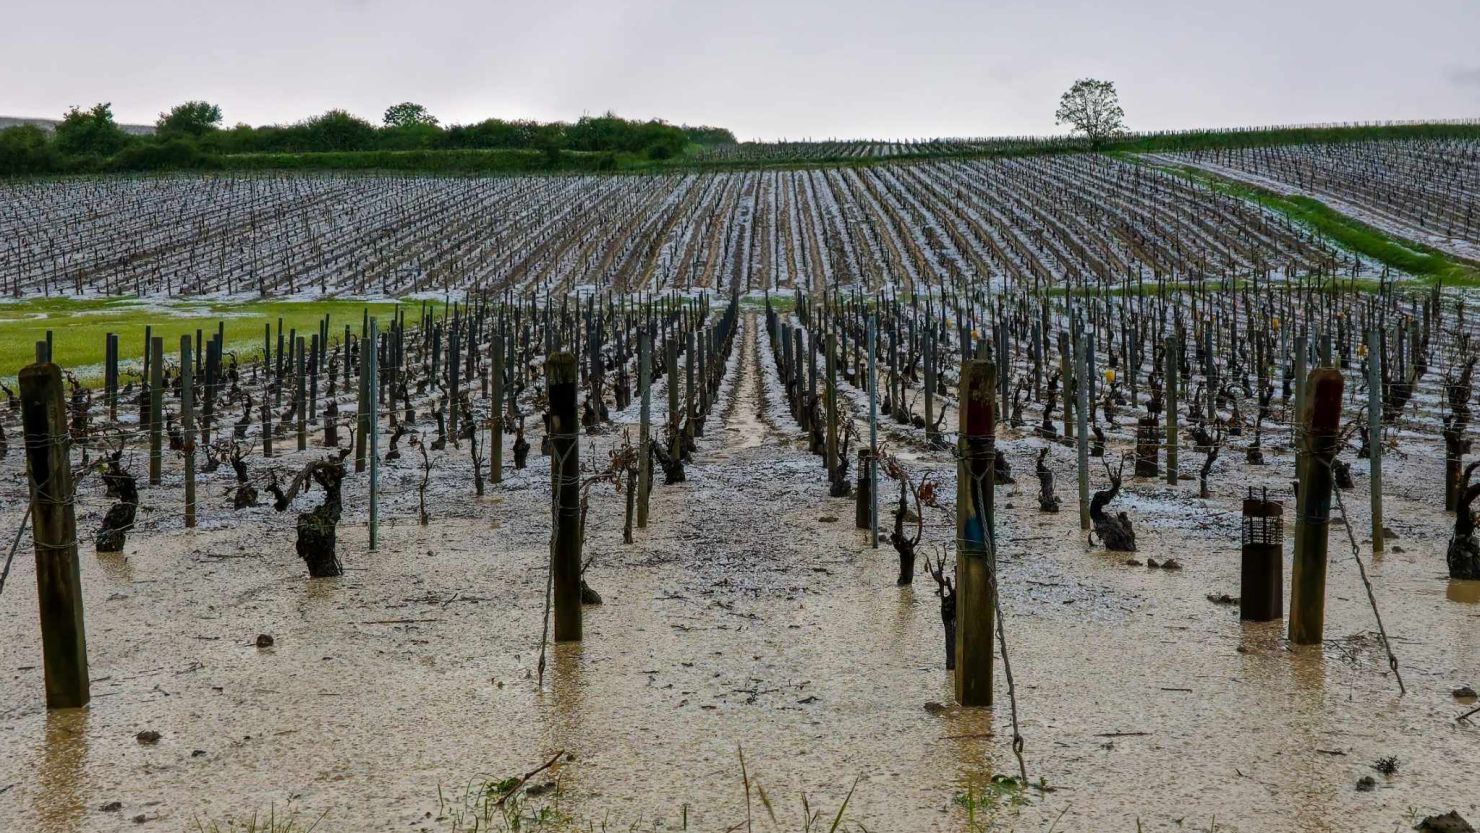 Vineyards in Chablis on Thursday May 2, following a destructive hailstorm.